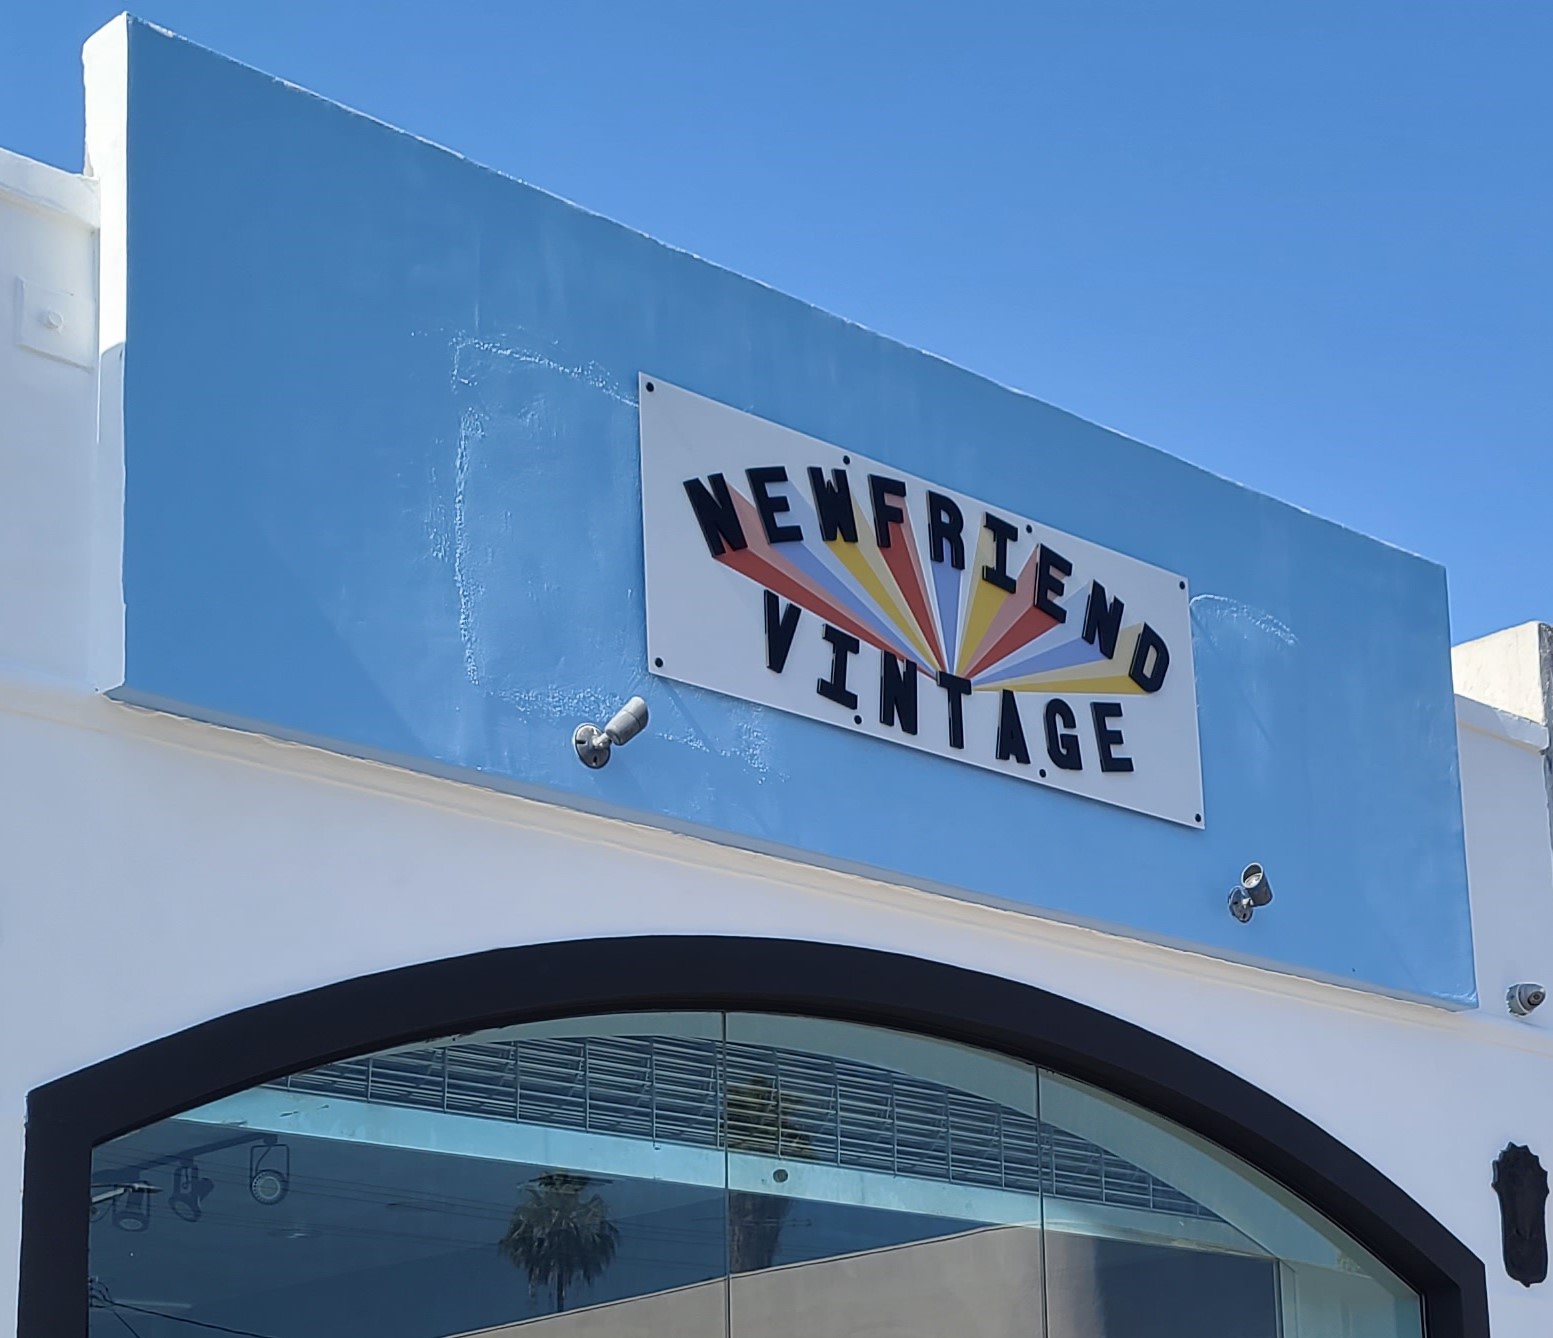 Unique signage will help make your brand stand out and attract customers. Like this custom storefront sign we for Newfriend Vintage's Los Angeles branch.